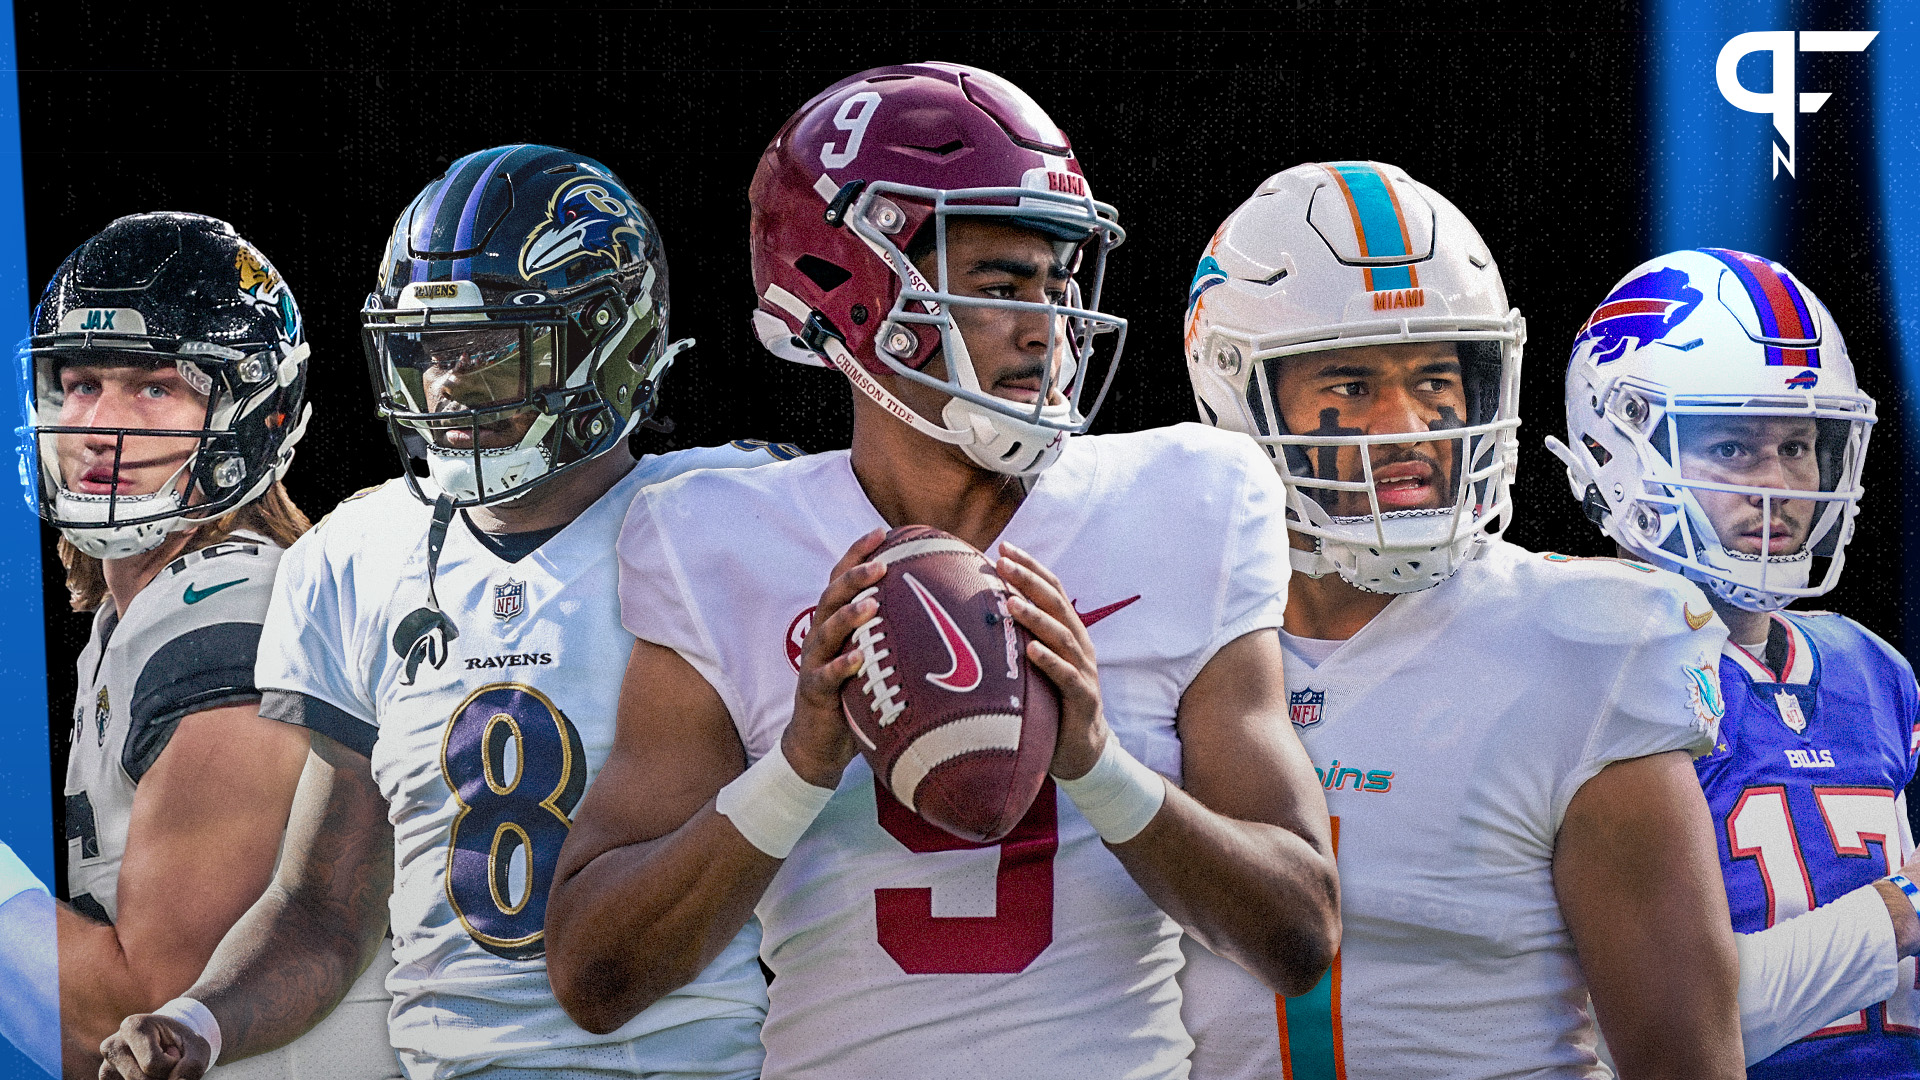 2022 NFL QB Draft Class Rankings; How Do They Stack Up For Steelers?